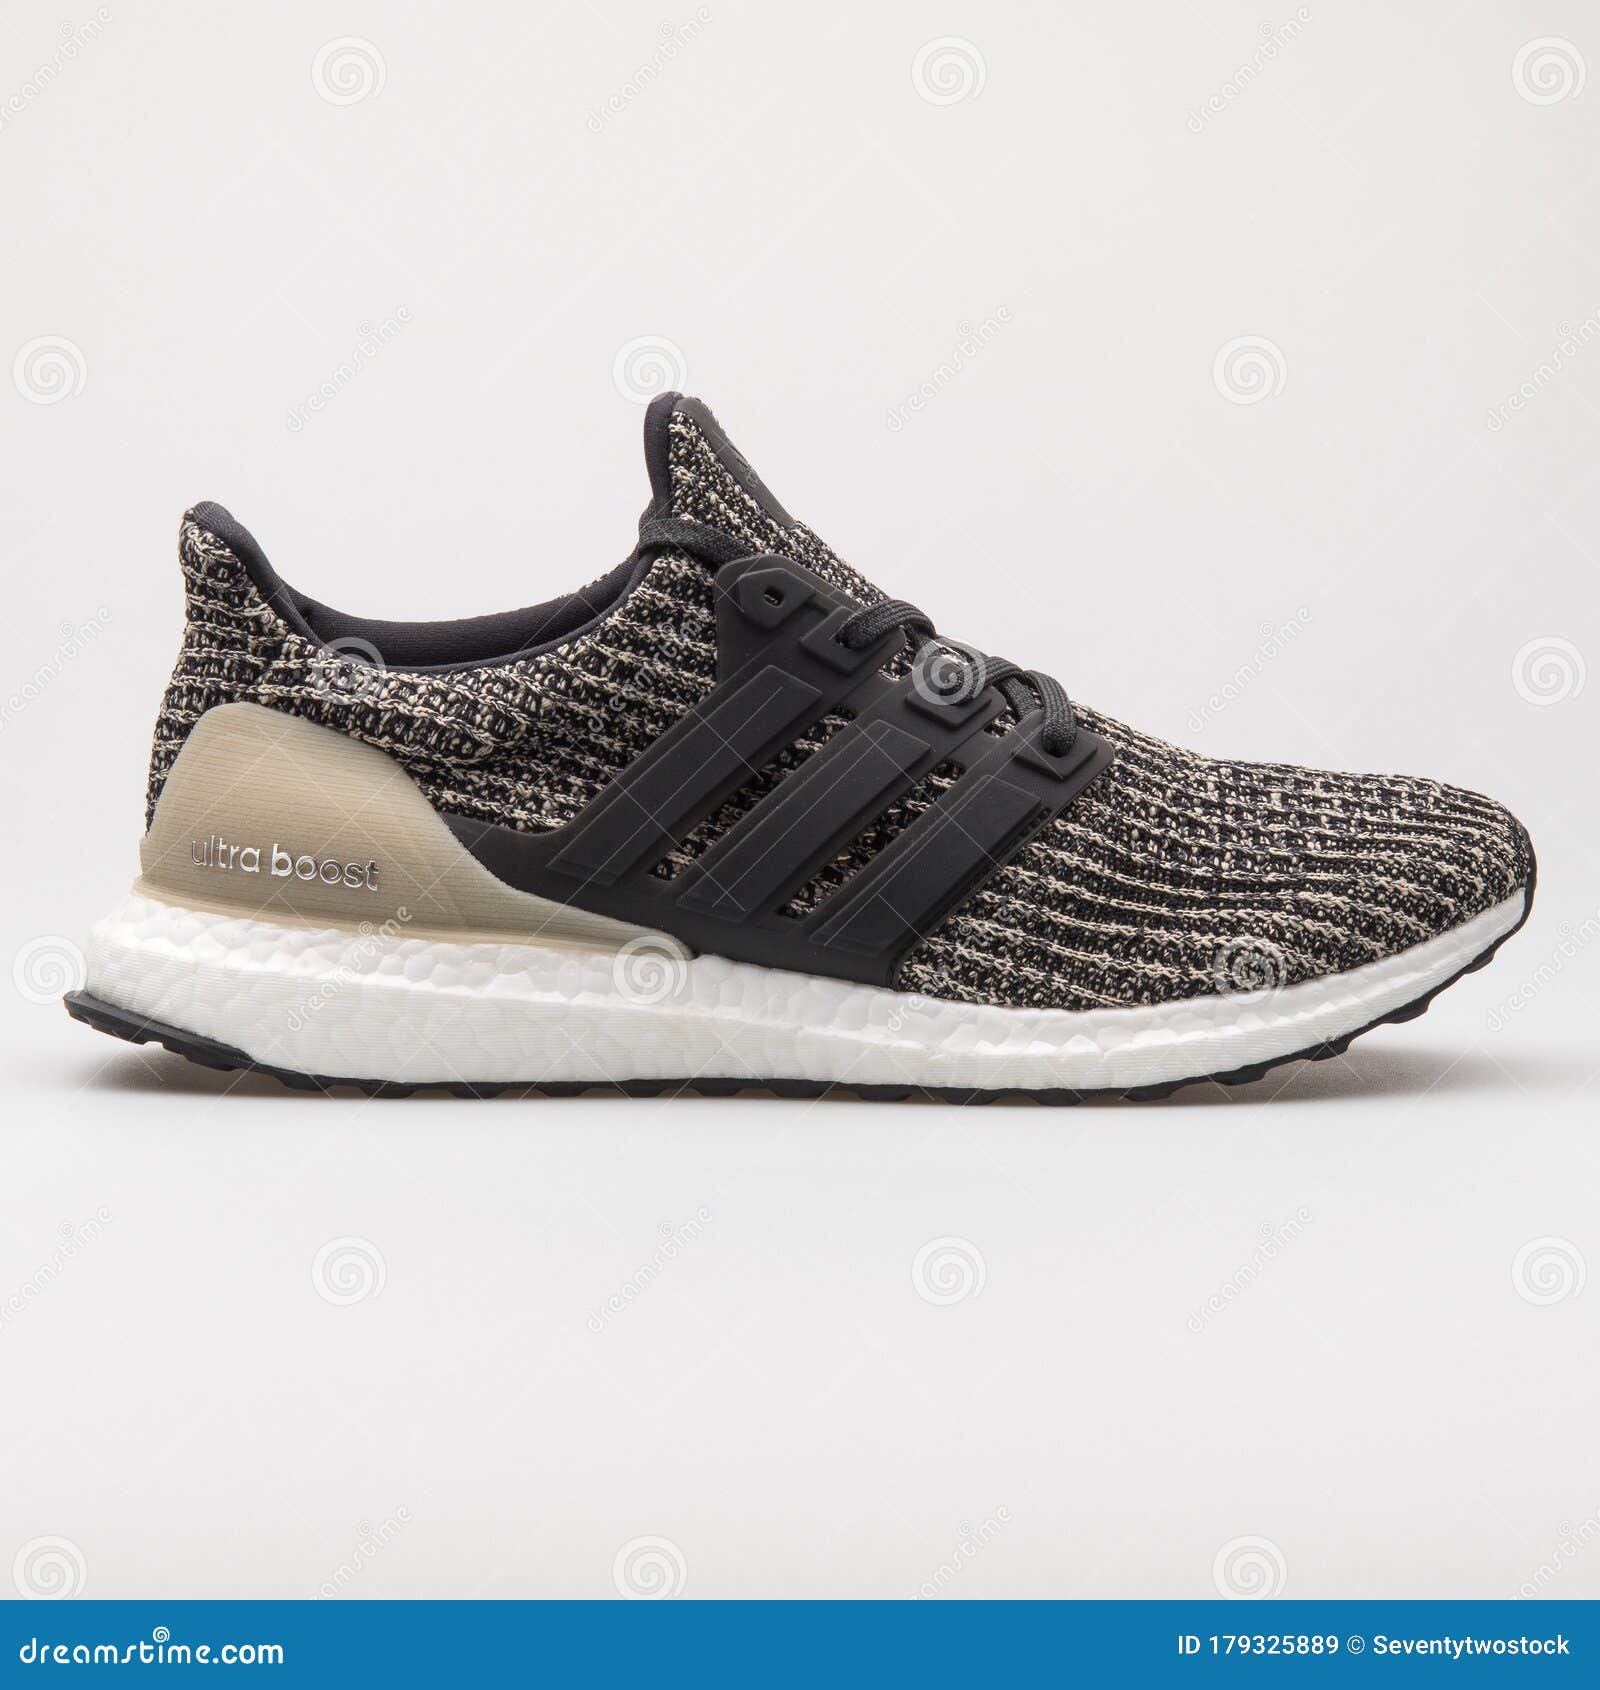 Adidas Ultra Boost Black Sneaker Editorial Stock Image Image of isolated: 179325889